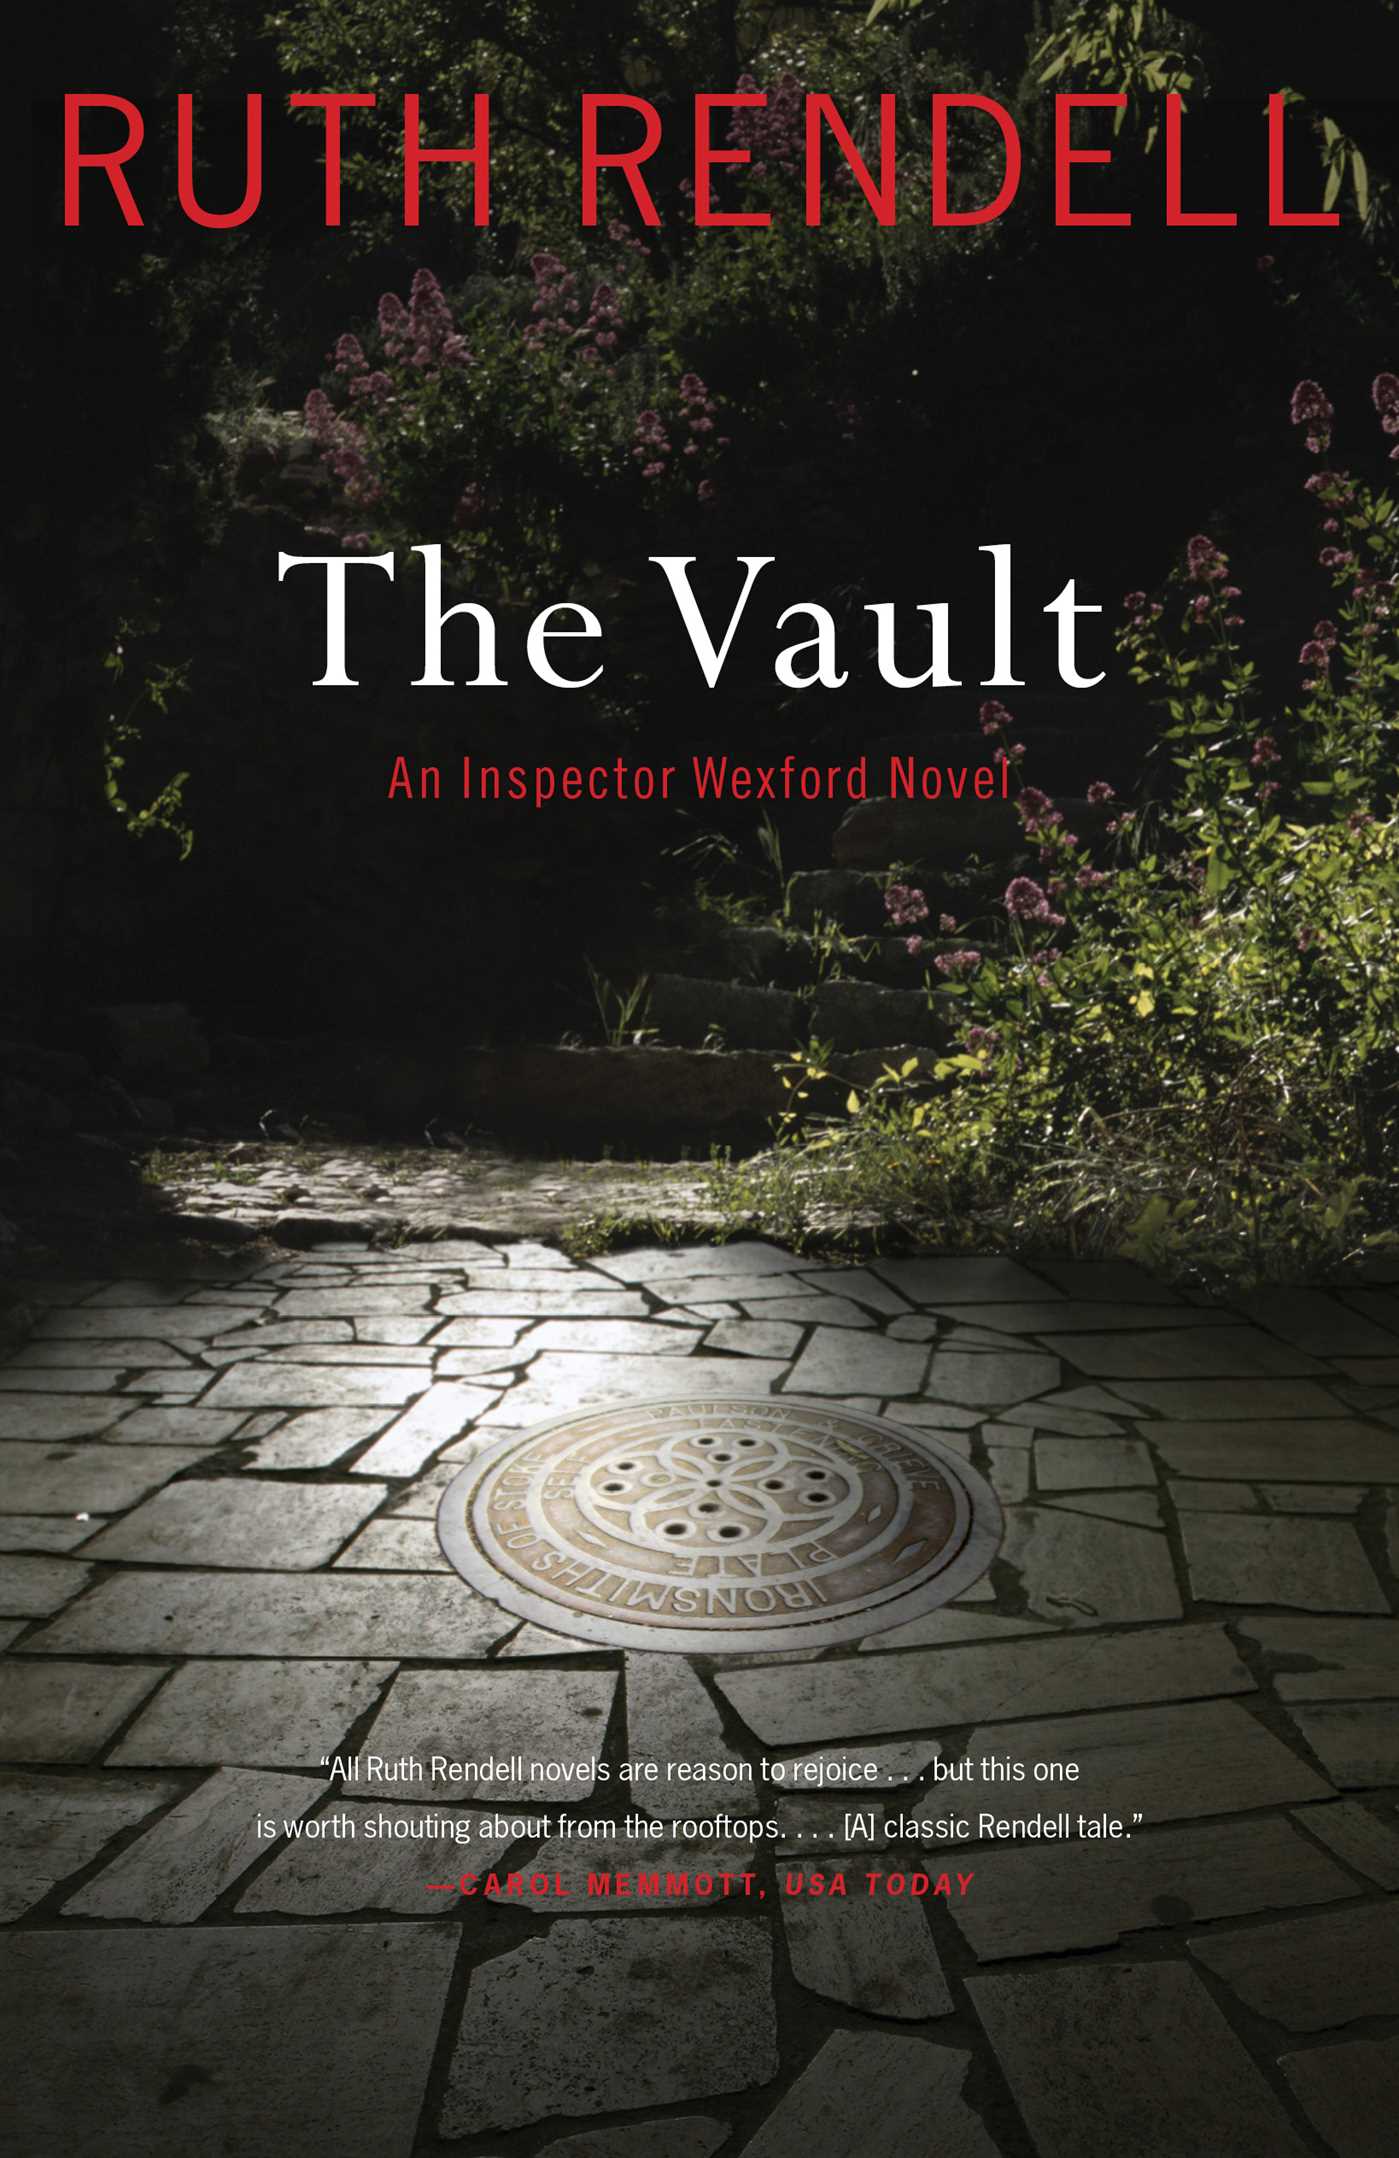 Image of "The Vault"